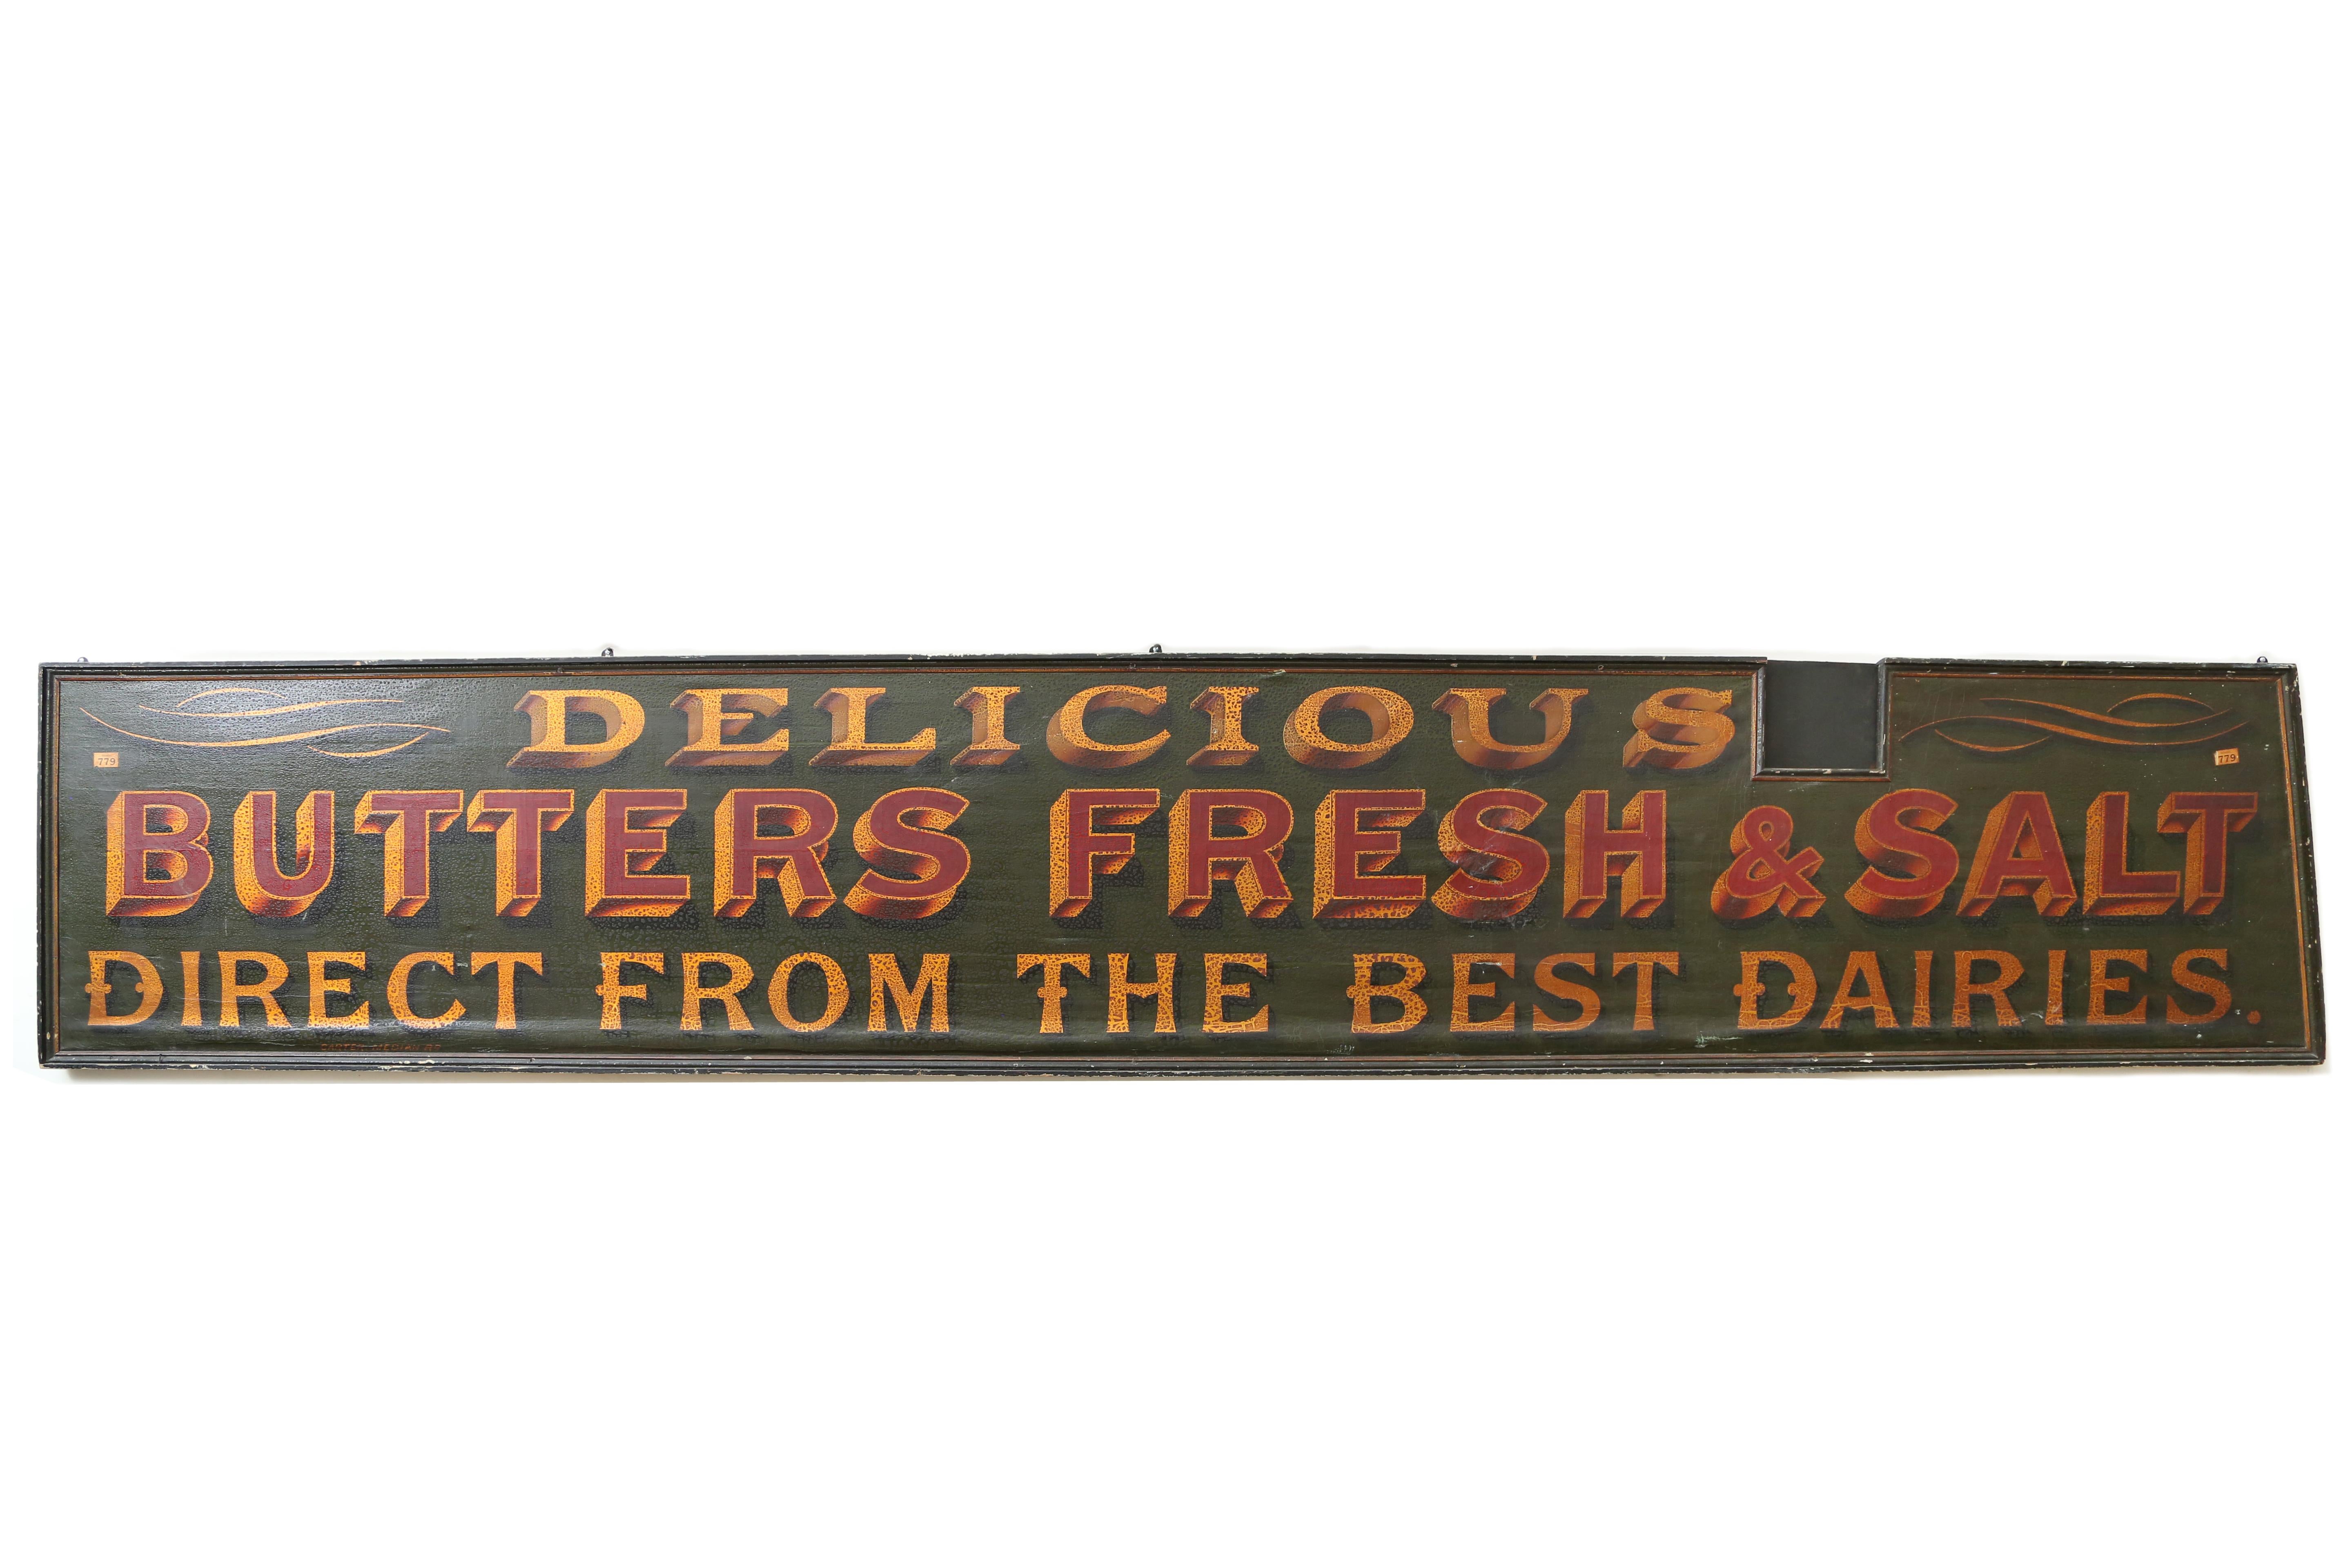 Pair of long late 19th century English advertising signs, probably from a type of market. They have quite a bit of graphic pop having the dark green background with bold lettering in red and gold.
The 